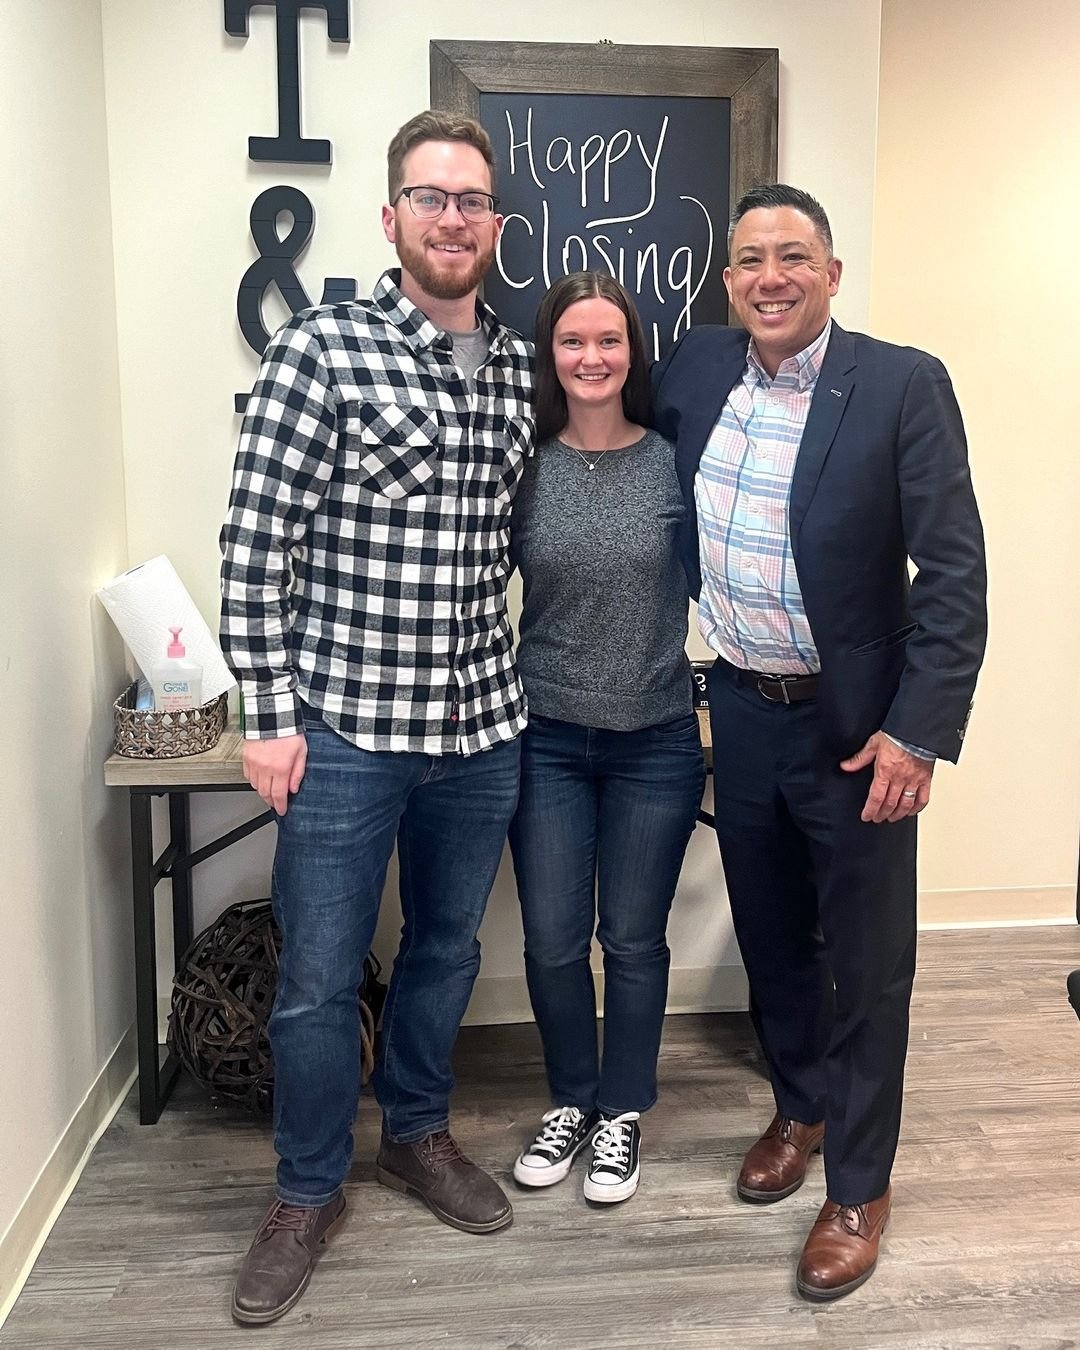 These buyers had a smooth closing on their new home in Saco! 🥂 Congratulations to our incredible clients. We are over the moon for you both. ⭐